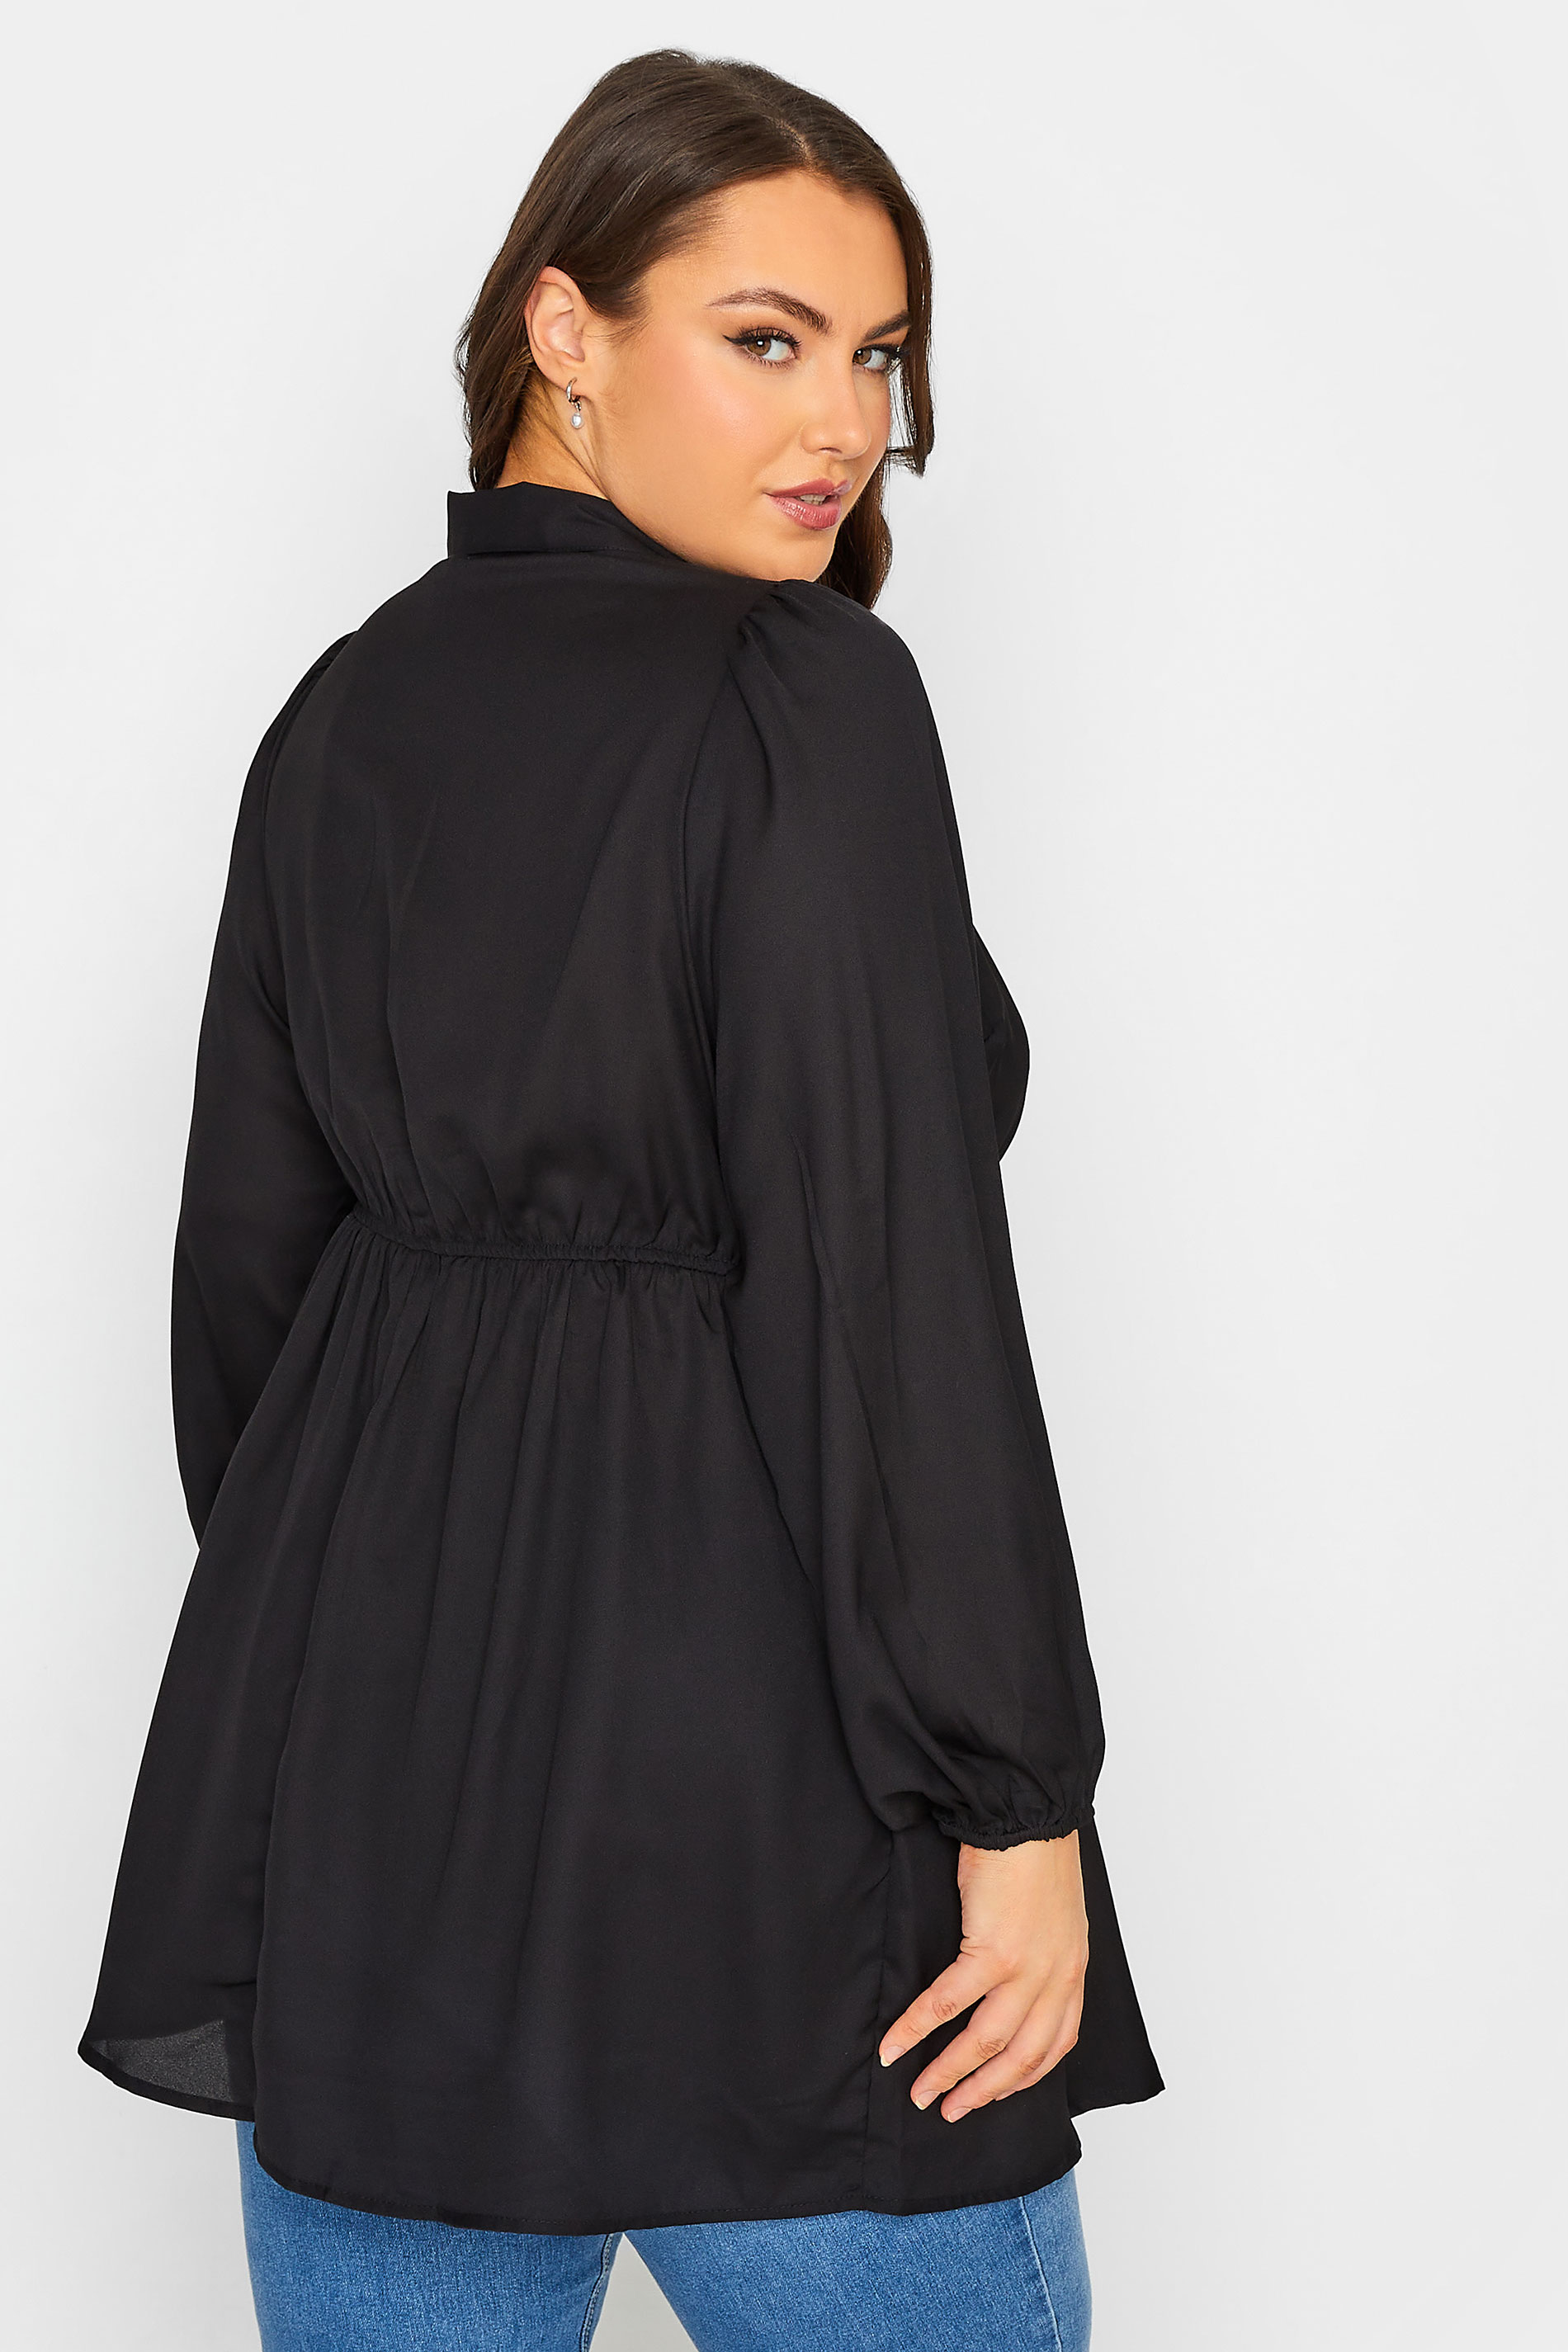 LIMITED COLLECTION Plus Size Black Peplum Blouse | Yours Clothing 3